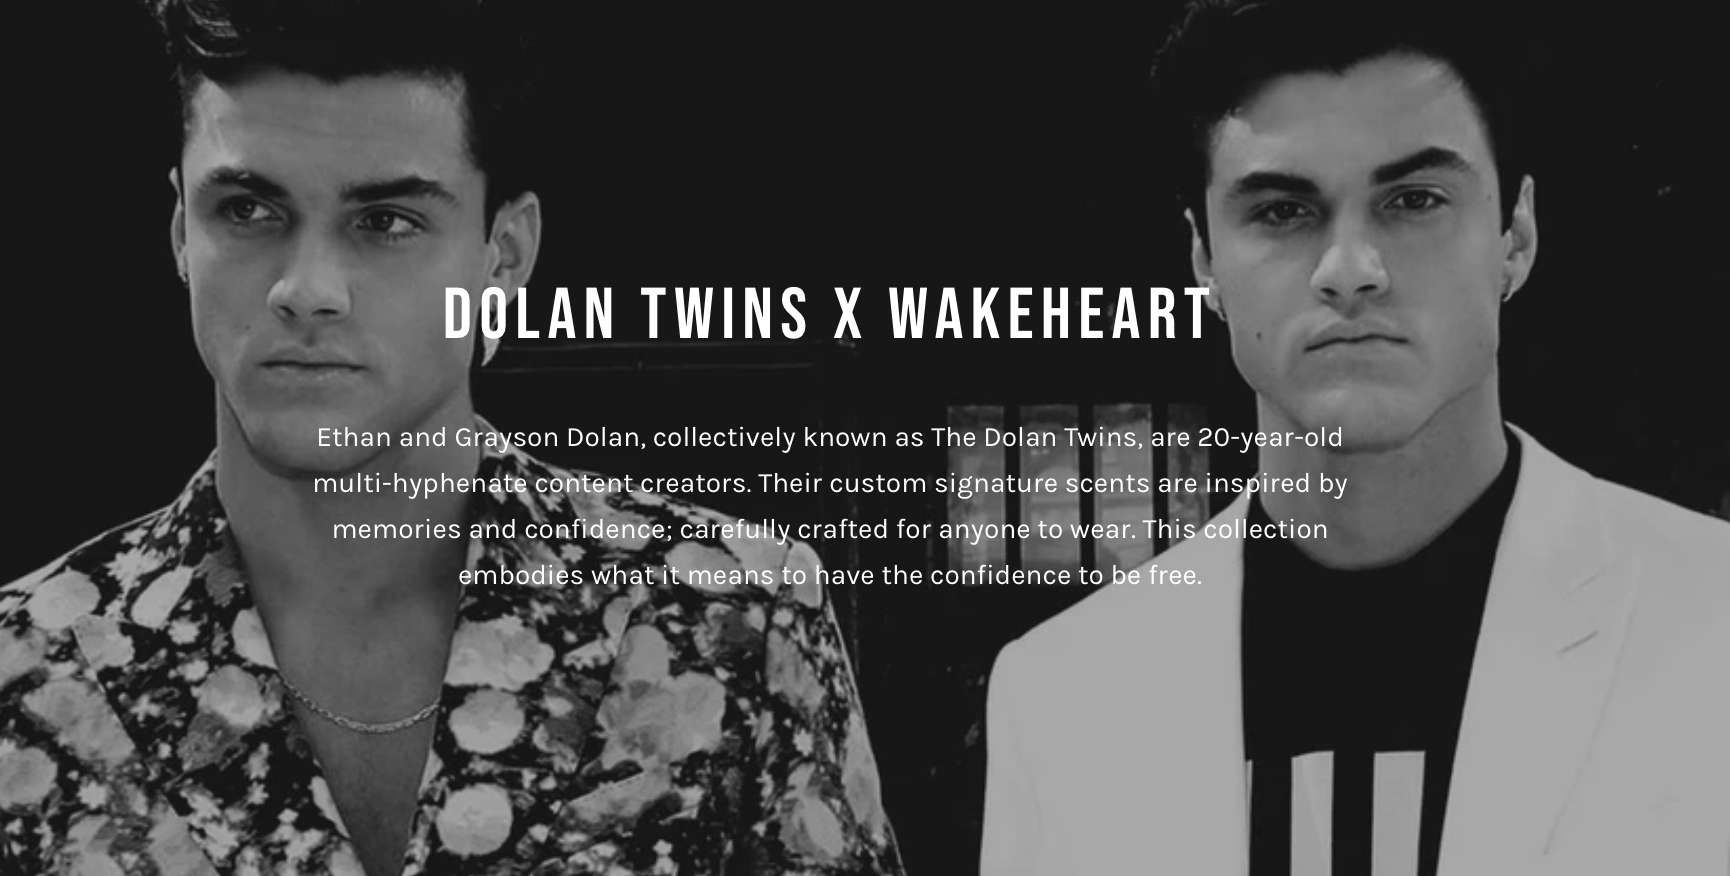 An advertisement for Wakeheart’s signature scents featuring co-founders Ethan and Grayson Dolan, with text describing the brand’s beginnings super-imposed on the image. 